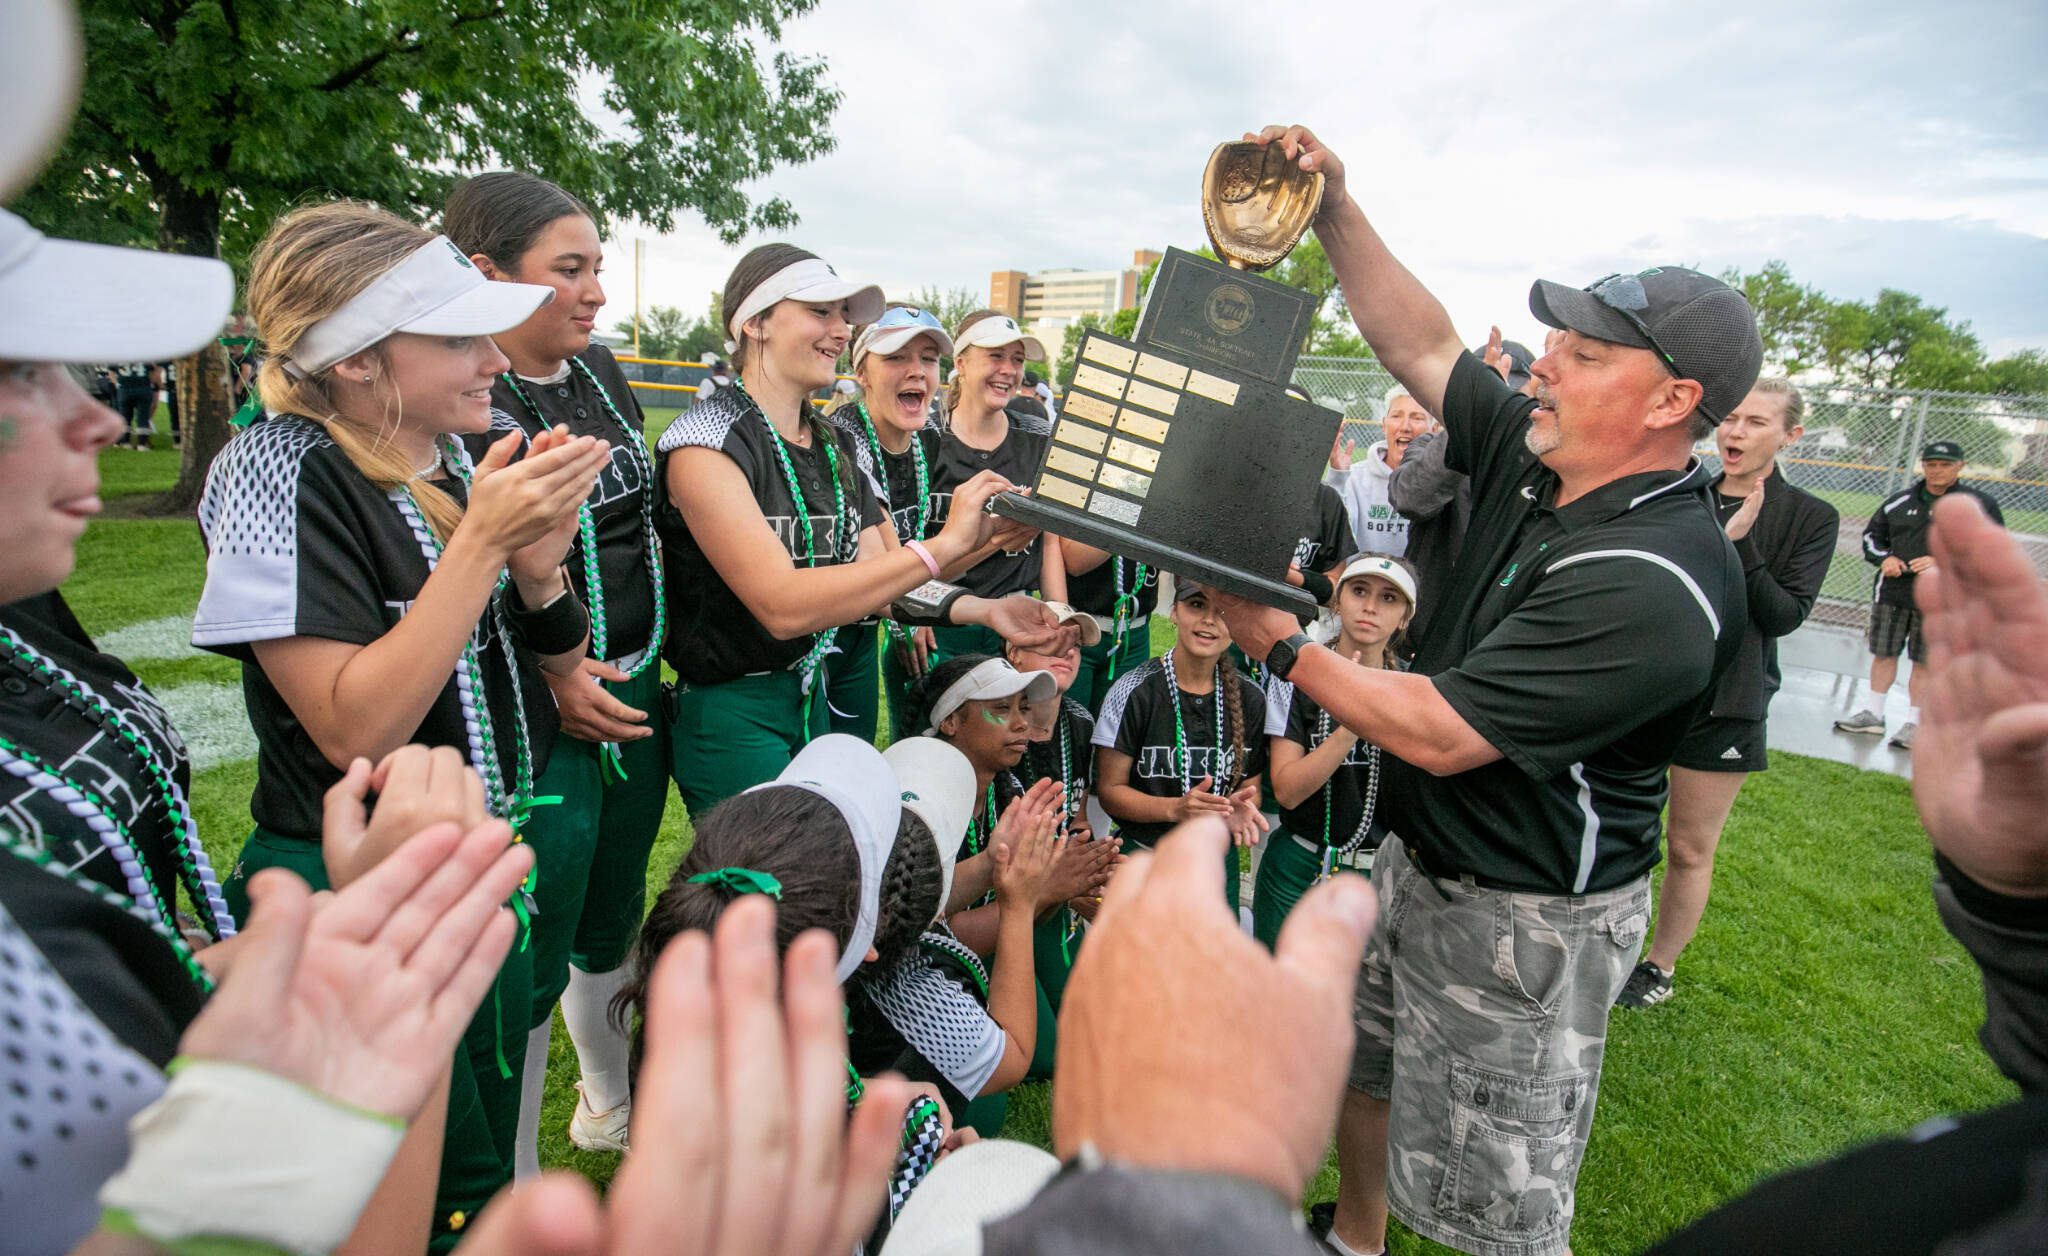 Jackson High School softball coach Kyle Peacocke hands the 2023 Class 4A softball championship trophy to the team after their win last year in Richland. Peacocke is stepping down after 13 years coaching the Timberwolves. (TJ Mullinax / for The Herald)